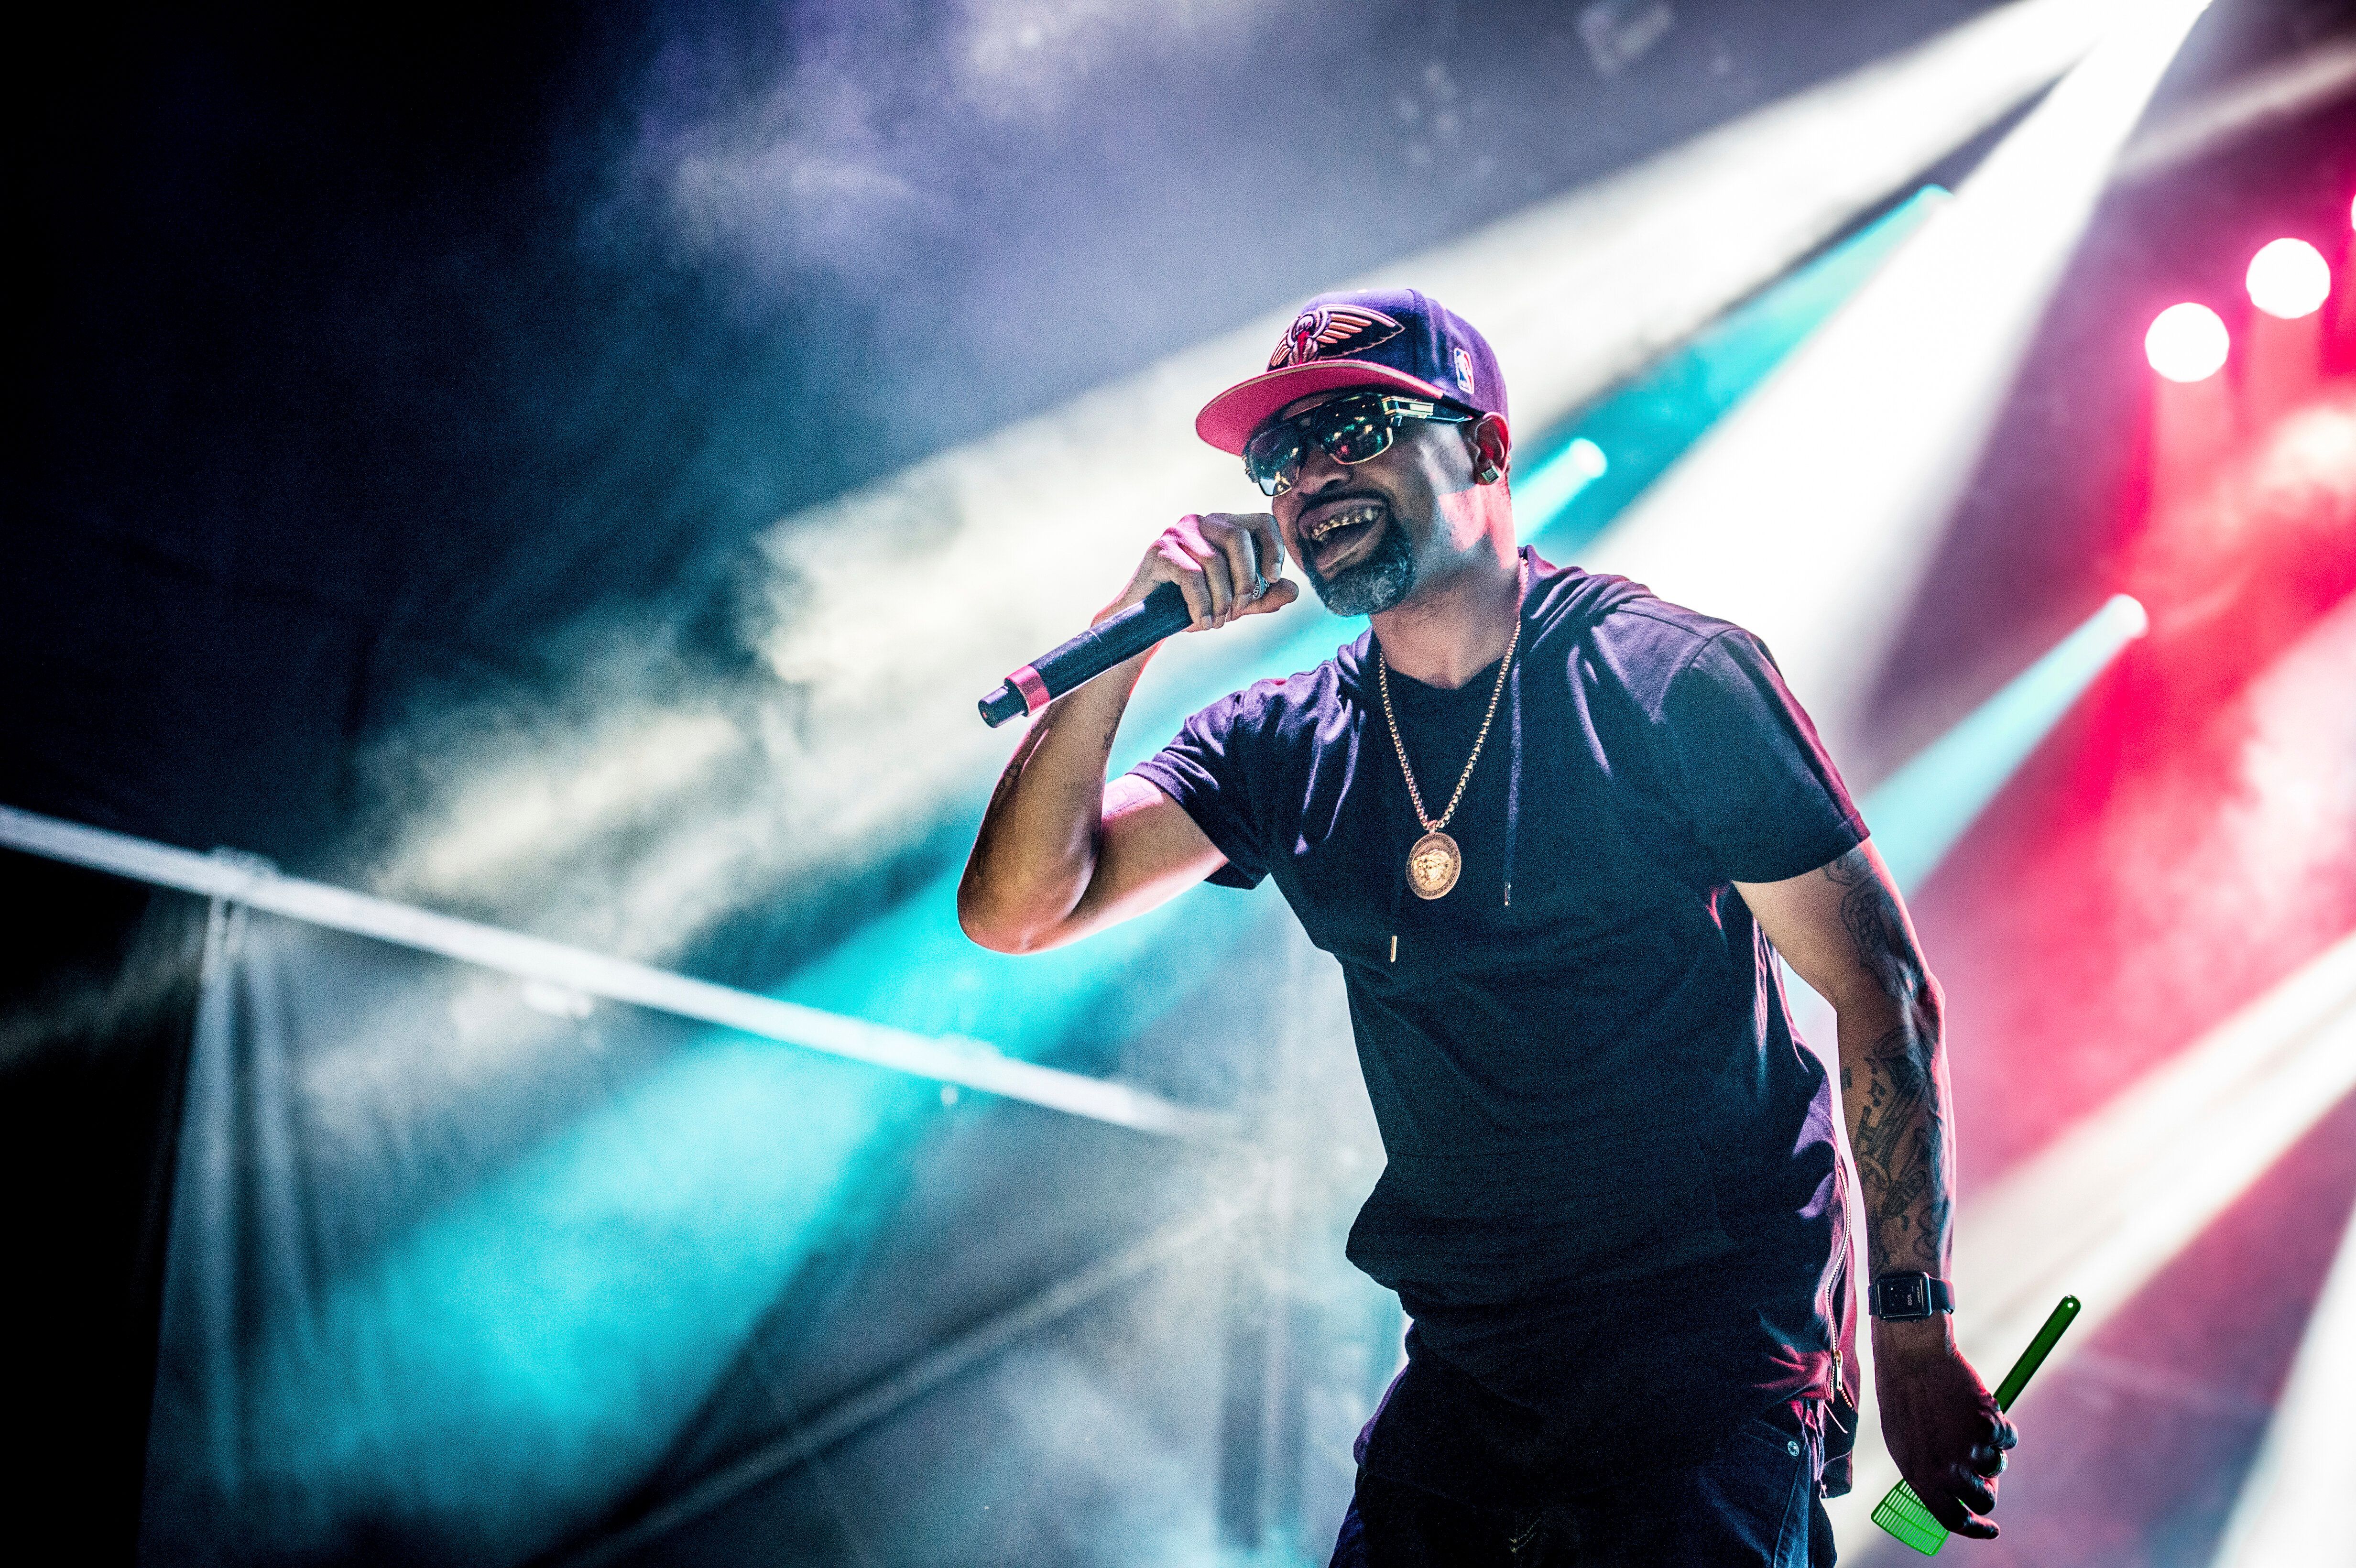 Juvenile performs at BUKU Music and Art Project at Mardi Gras World on Friday, March 10, 2017, in New Orleans. (Photo by Amy Harris/Invision/AP)